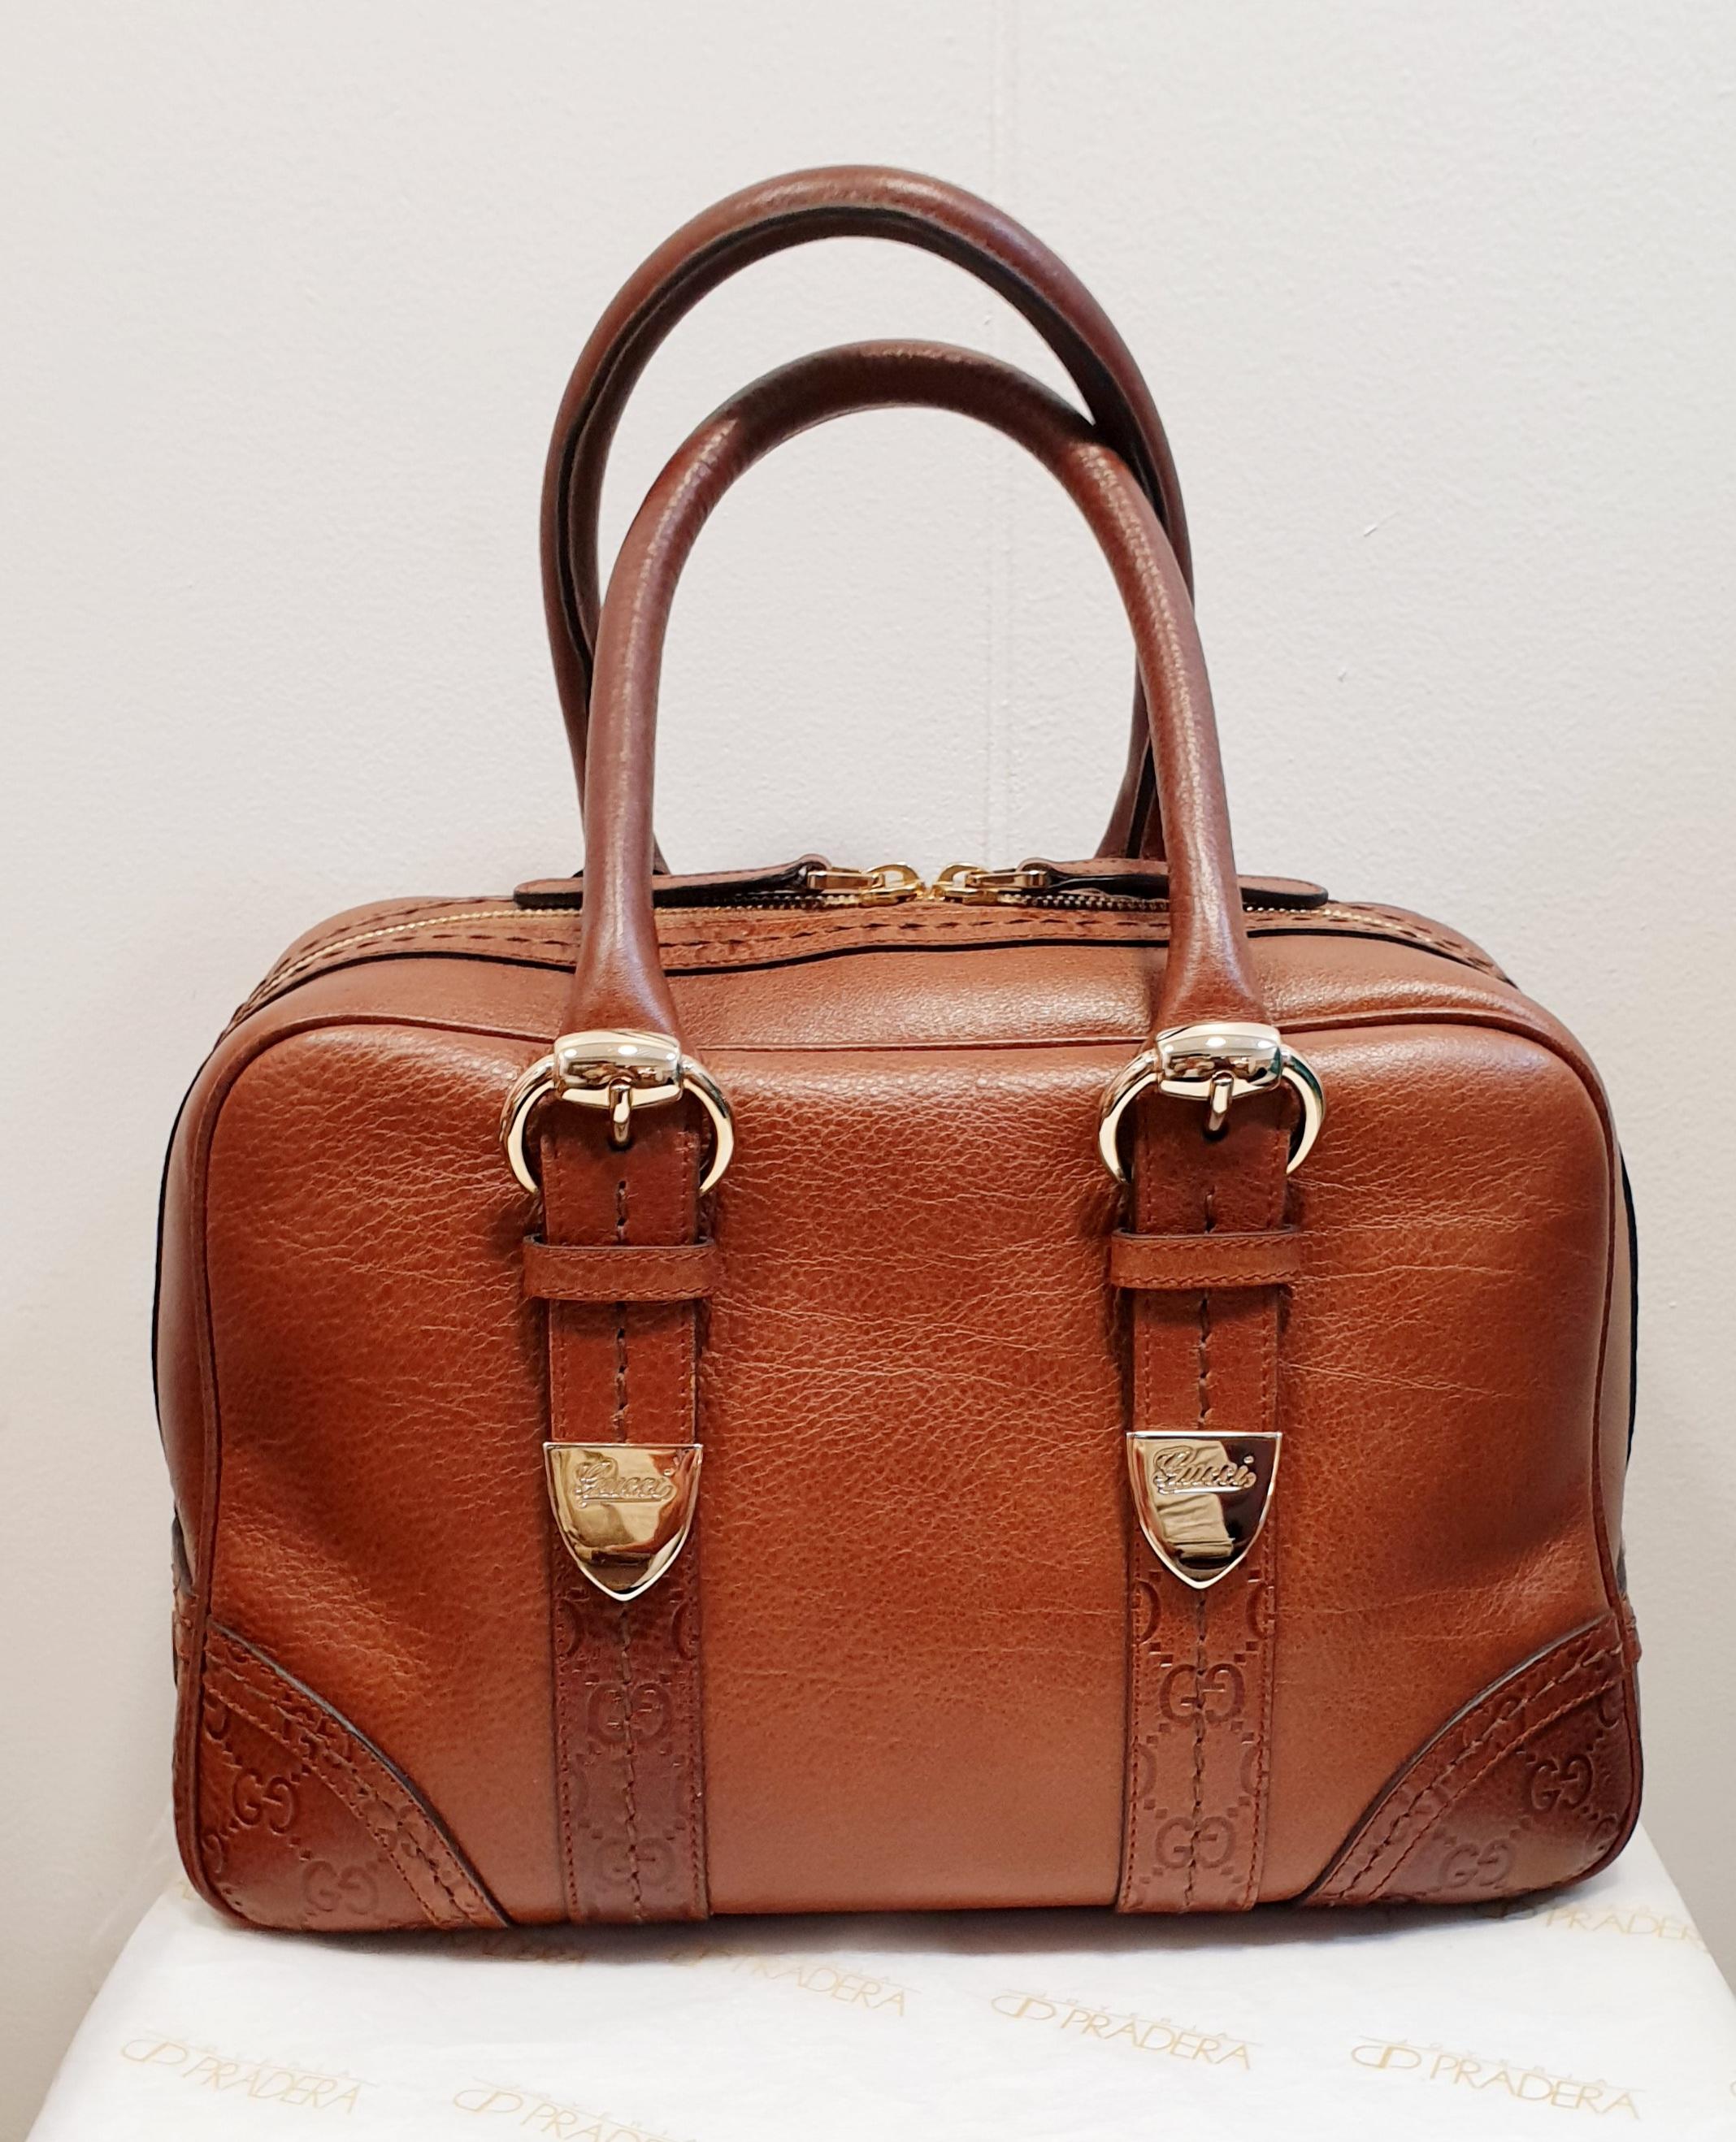 Gucci Maxima Boston Bag Leather Brown
Rest of boutique stock never used
This boston bag features a leather body, rolled handles, a top zip closure, and an interior zip pocket.

Dimensions:
Length: 20 cm
Width: 35 cm
Depth: 12 cm
Hand Drop: 14

Brand